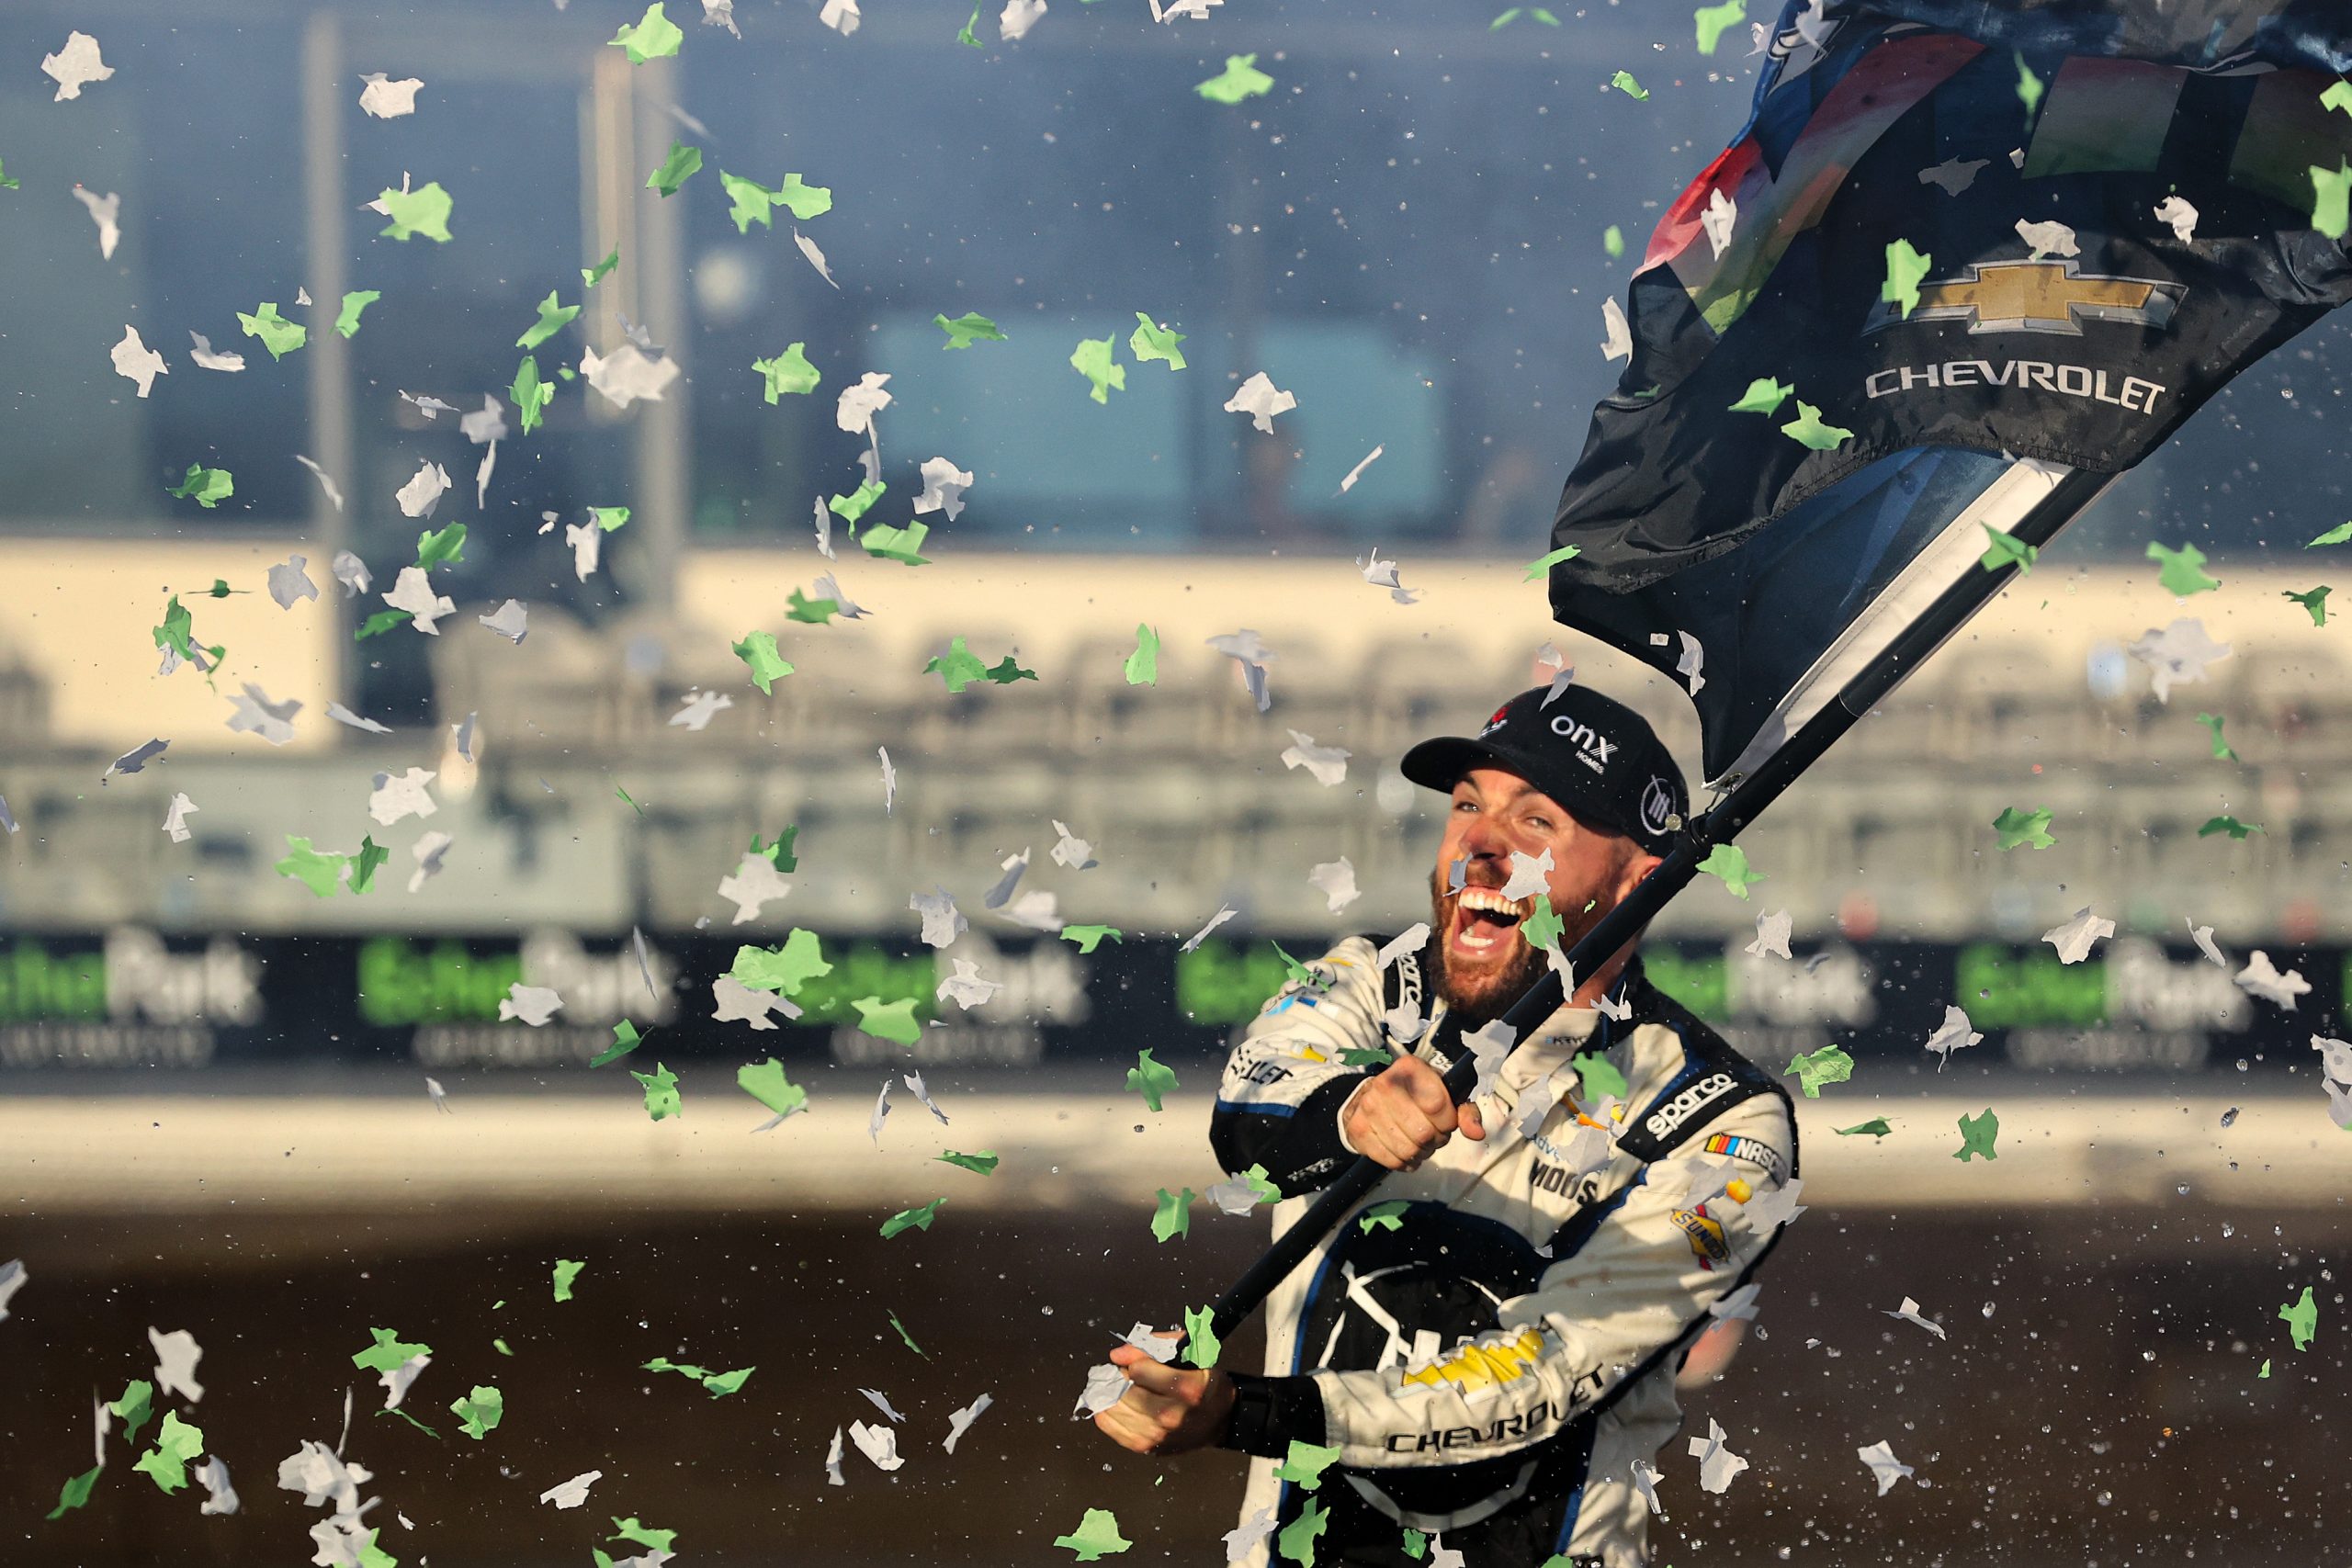 AUSTIN, TEXAS - MARCH 27: Ross Chastain, driver of the #1 ONX Homes/iFly Chevrolet, celebrates after winning the NASCAR Cup Series Echopark Automotive Grand Prix at Circuit of The Americas on March 27, 2022 in Austin, Texas. (Photo by Dylan Buell/Getty Images)